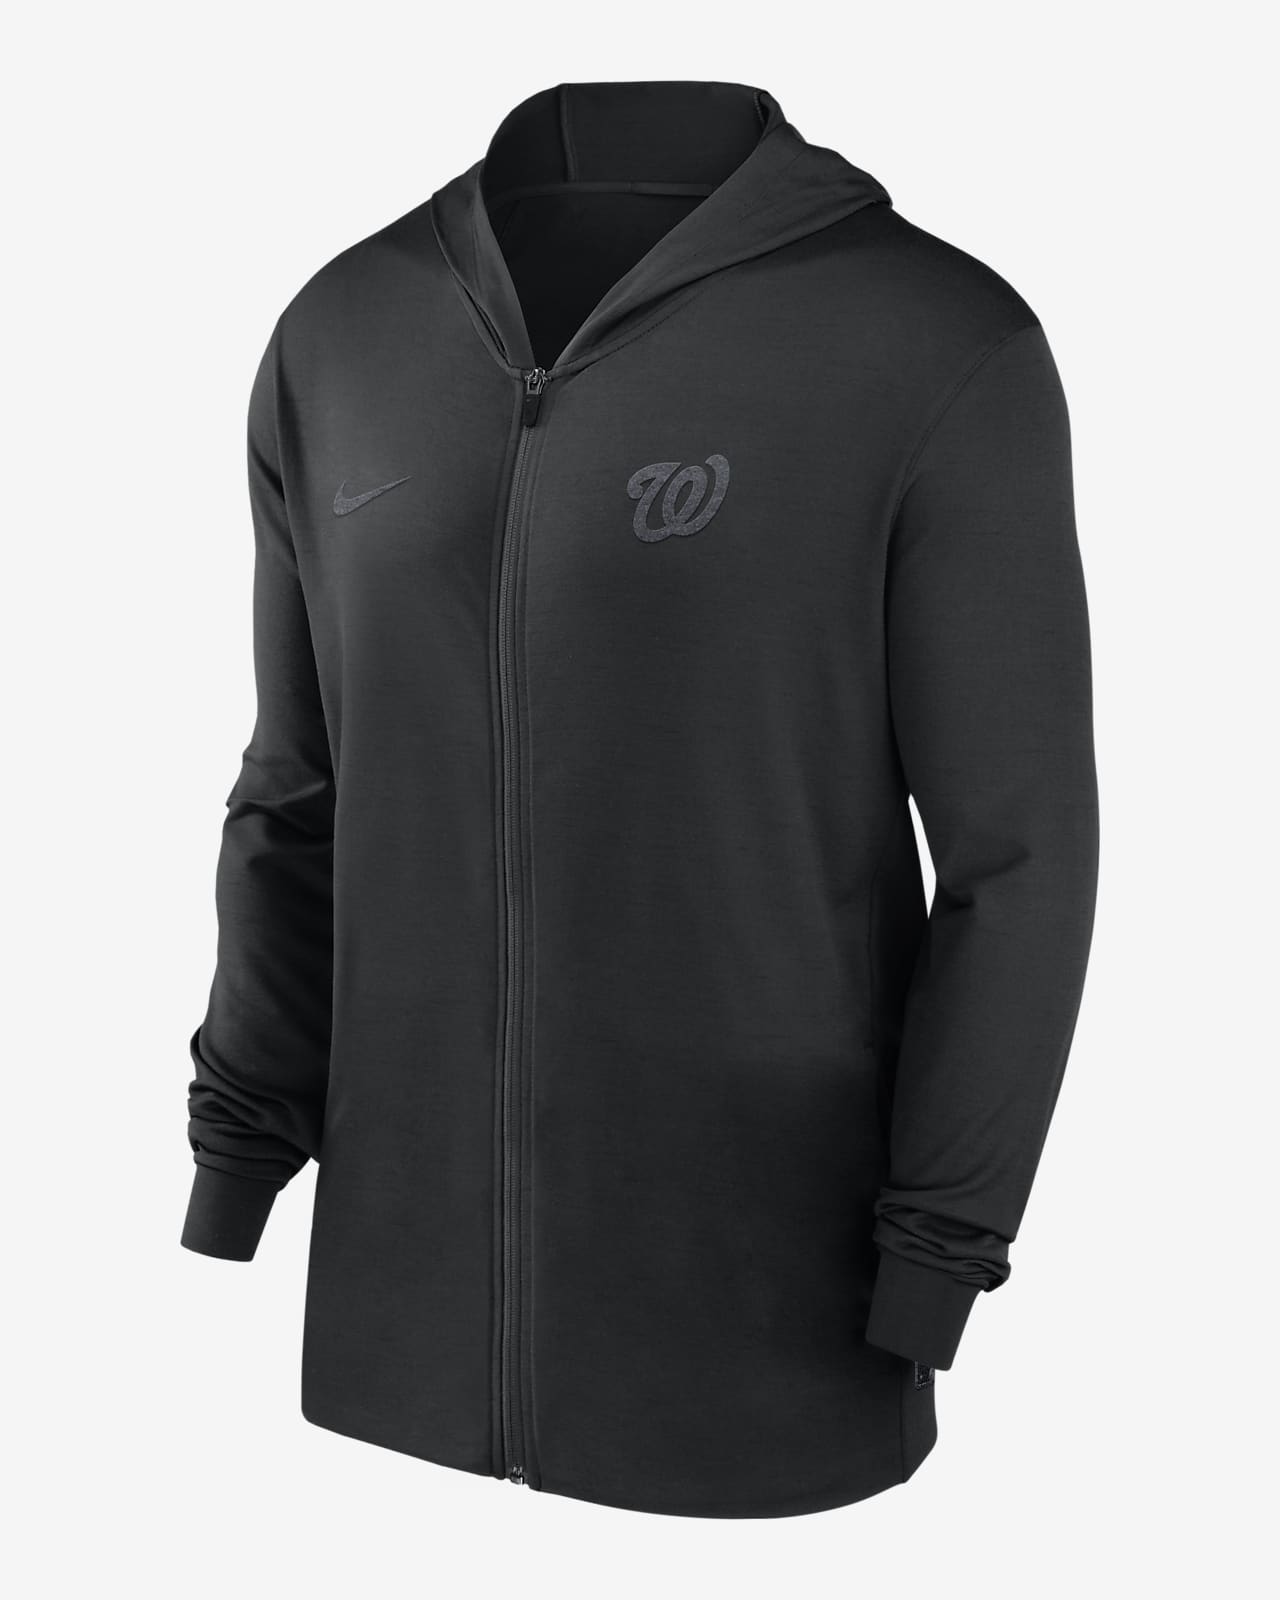 Nike City Connect Dugout (MLB Milwaukee Brewers) Men's Full-Zip Jacket